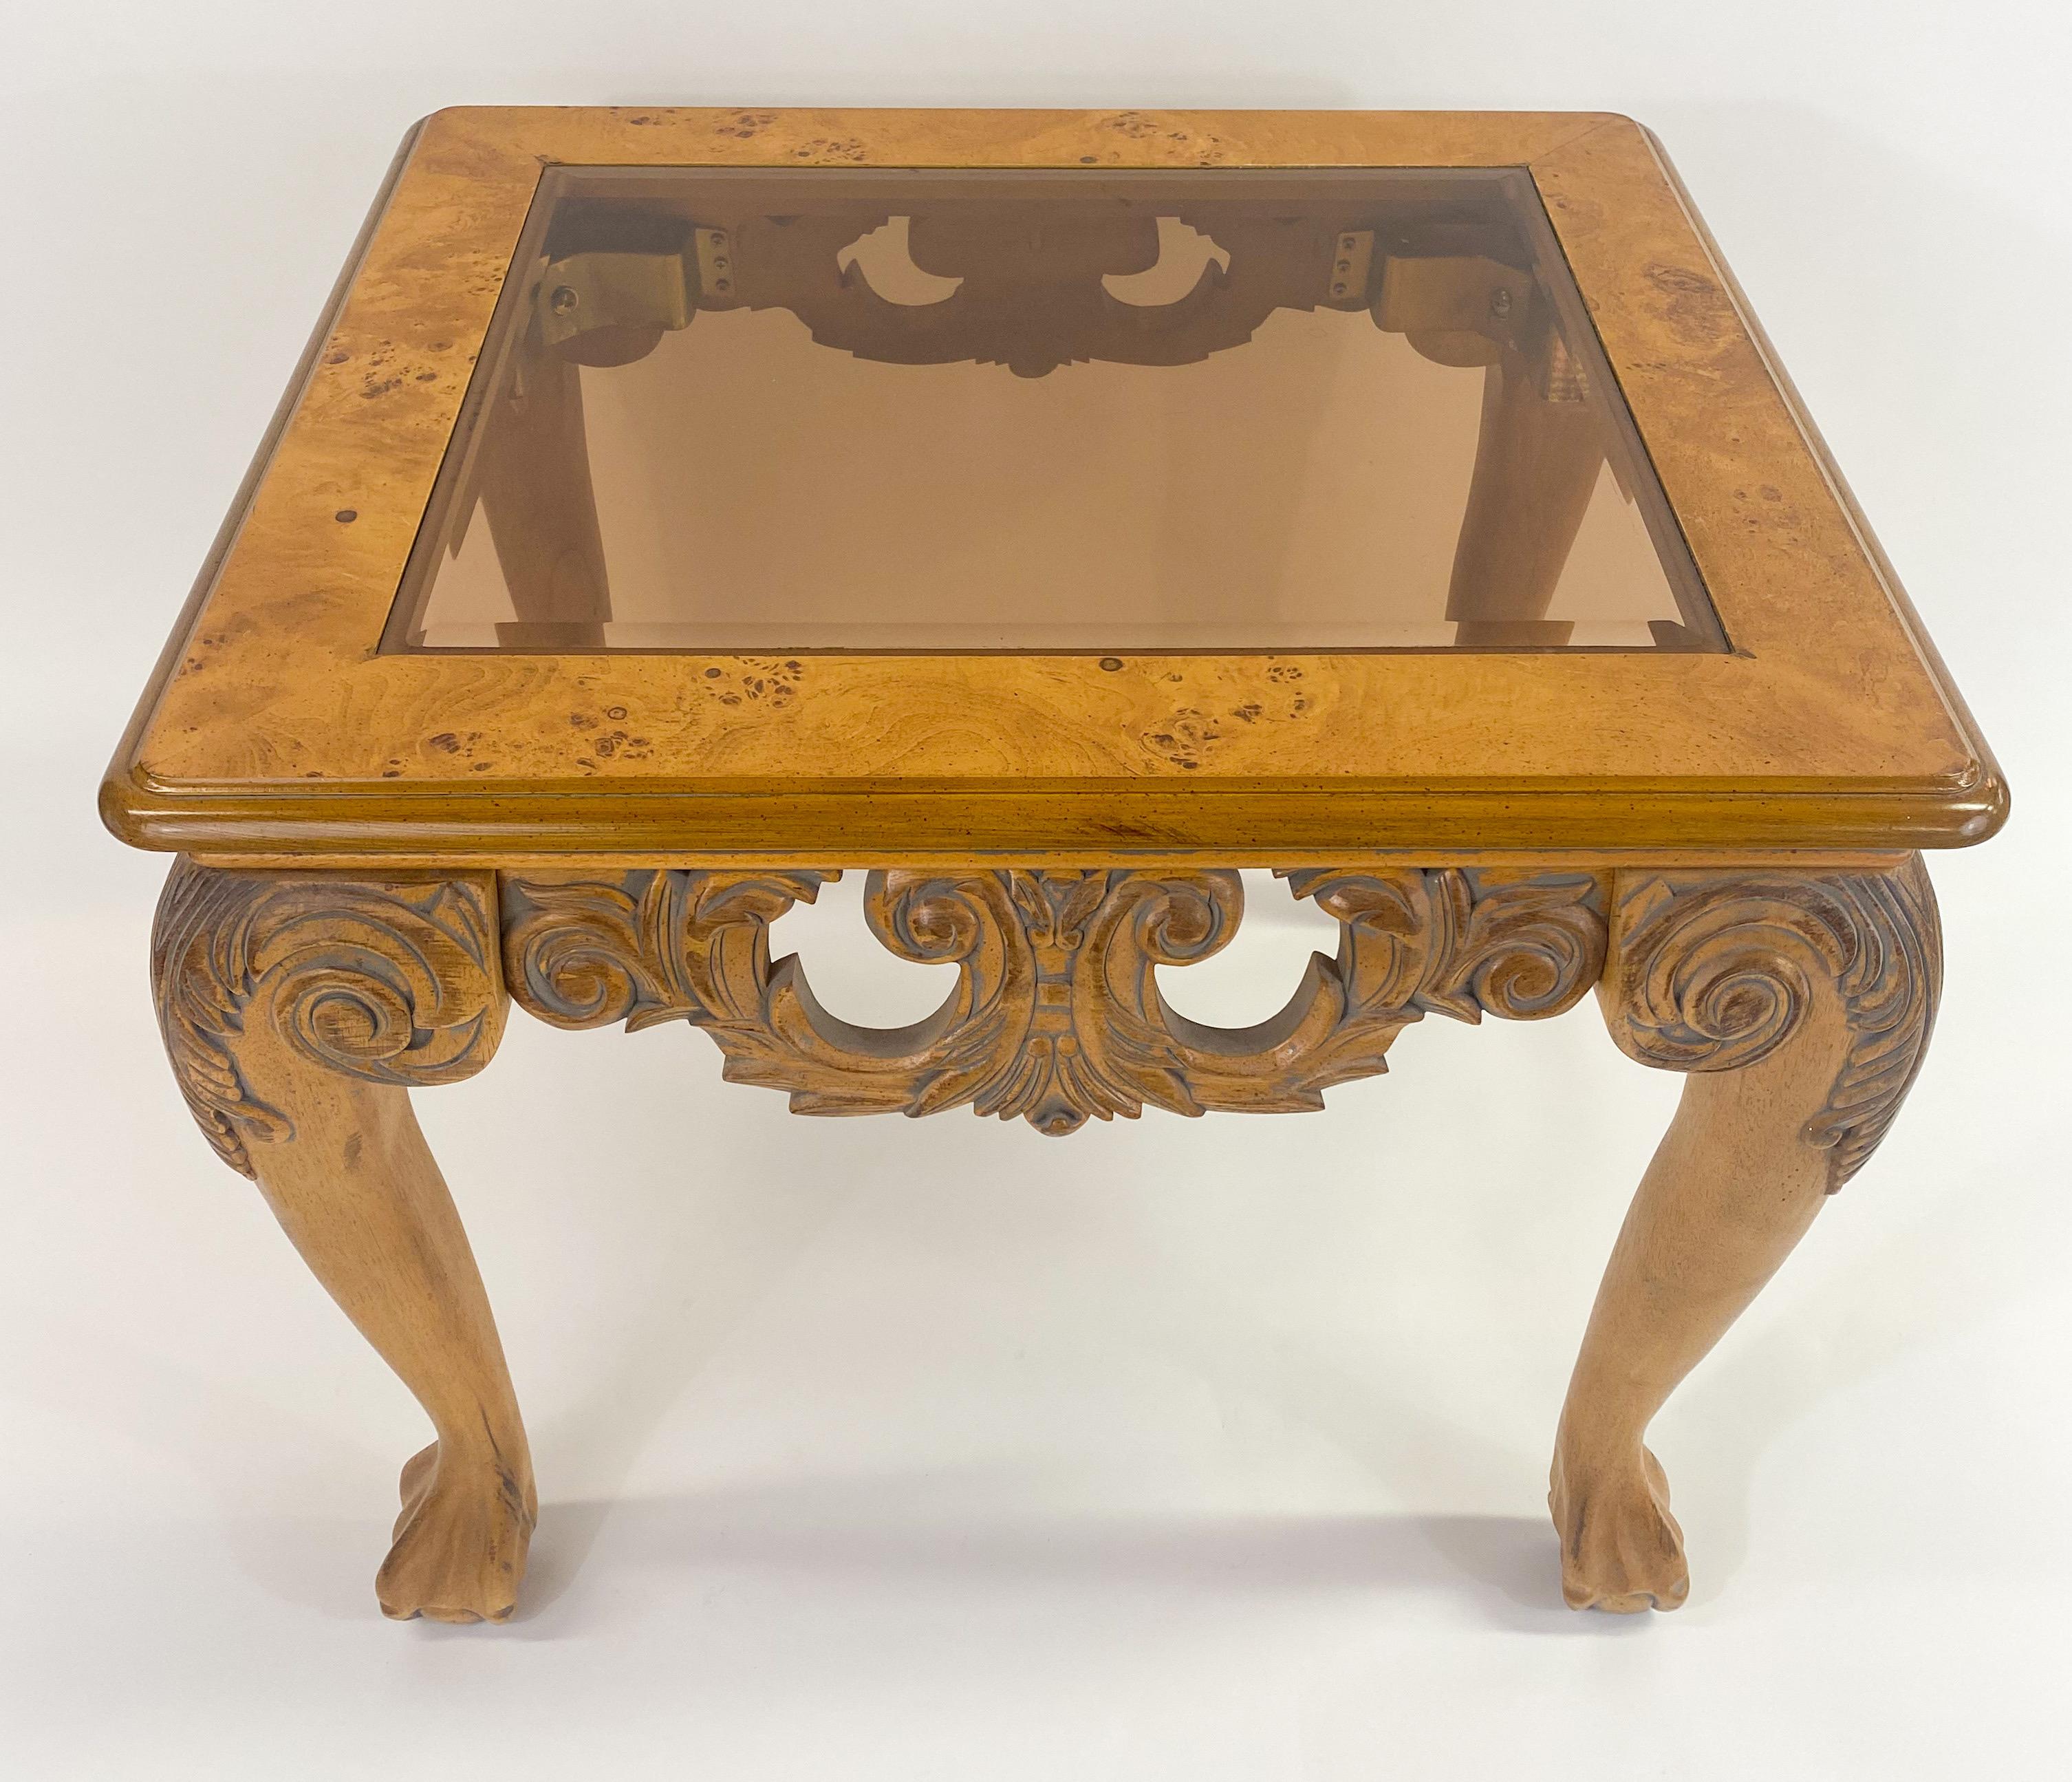 An elegant Chippendale Queen Ann style coffee or cocktail table. The table is finely carved showing beautiful scrolls and leaves design and raised by four cabriole leg with acanthus leaf and scroll design terminating on ball and claw foot. The table